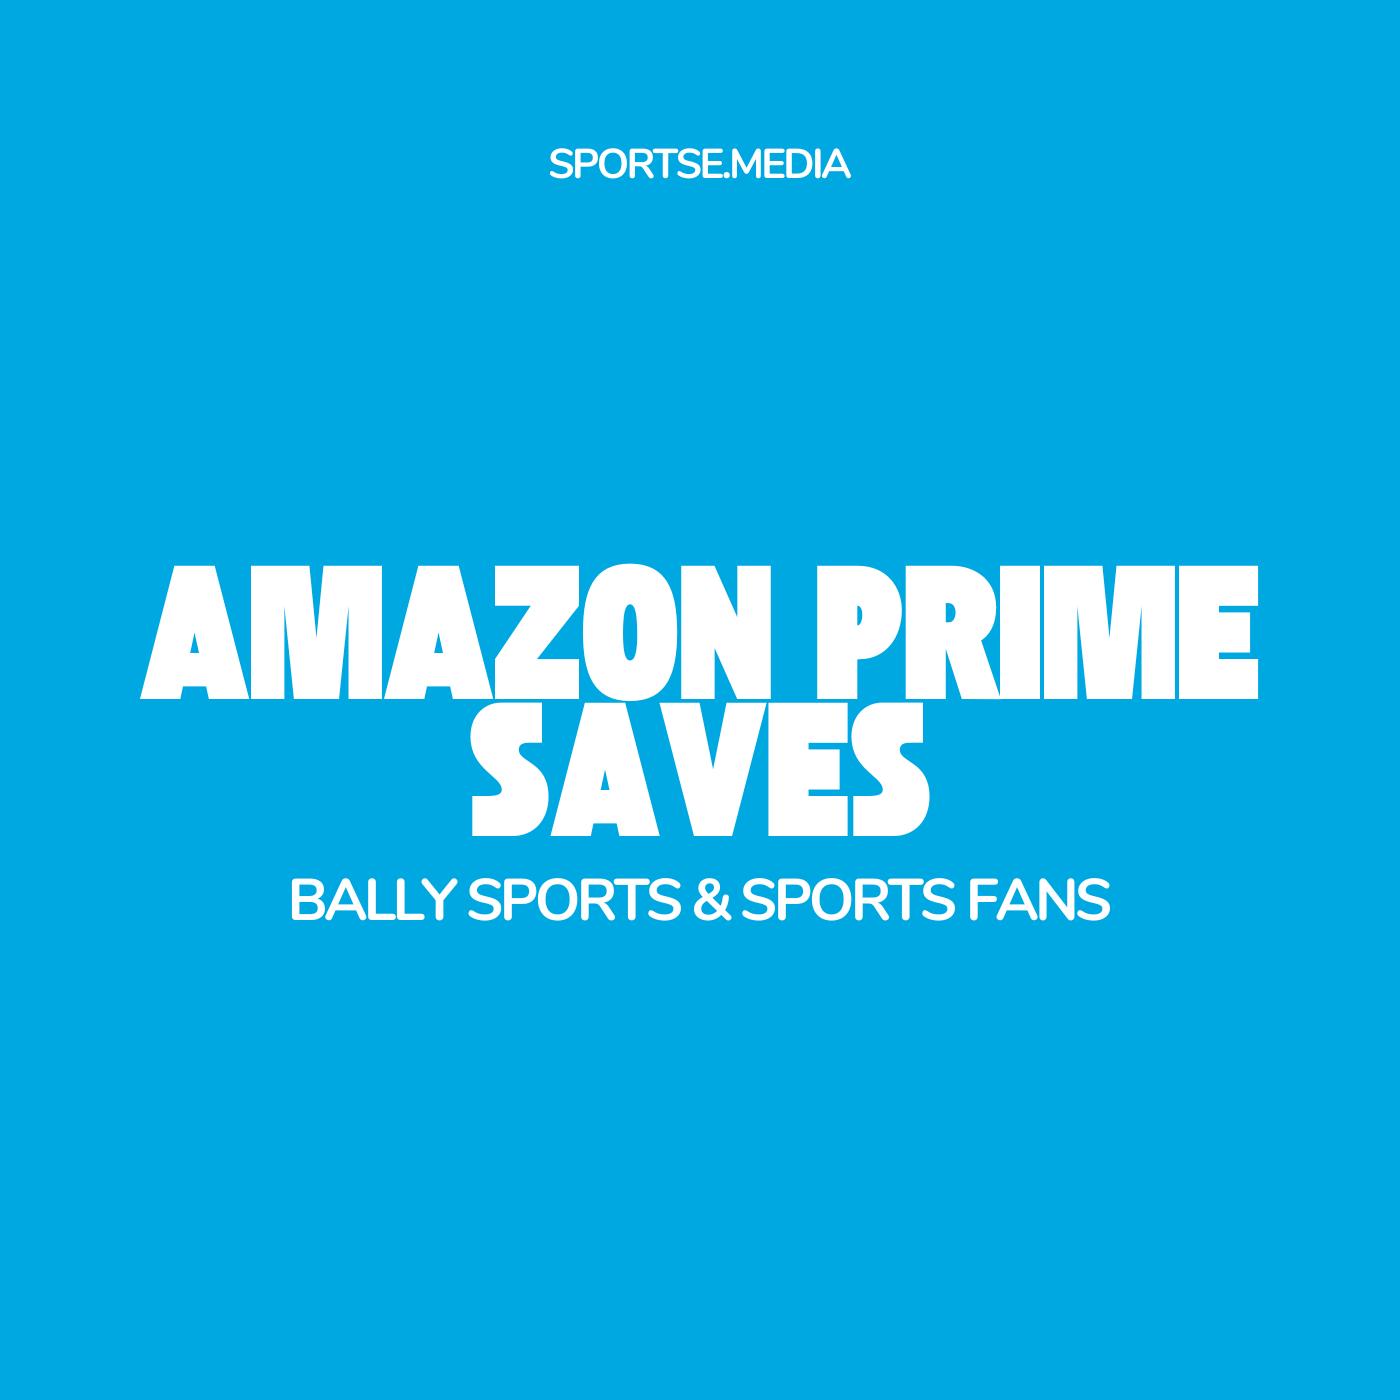 Amazon Prime Saves Bally Sports and Sports Fans Everywhere